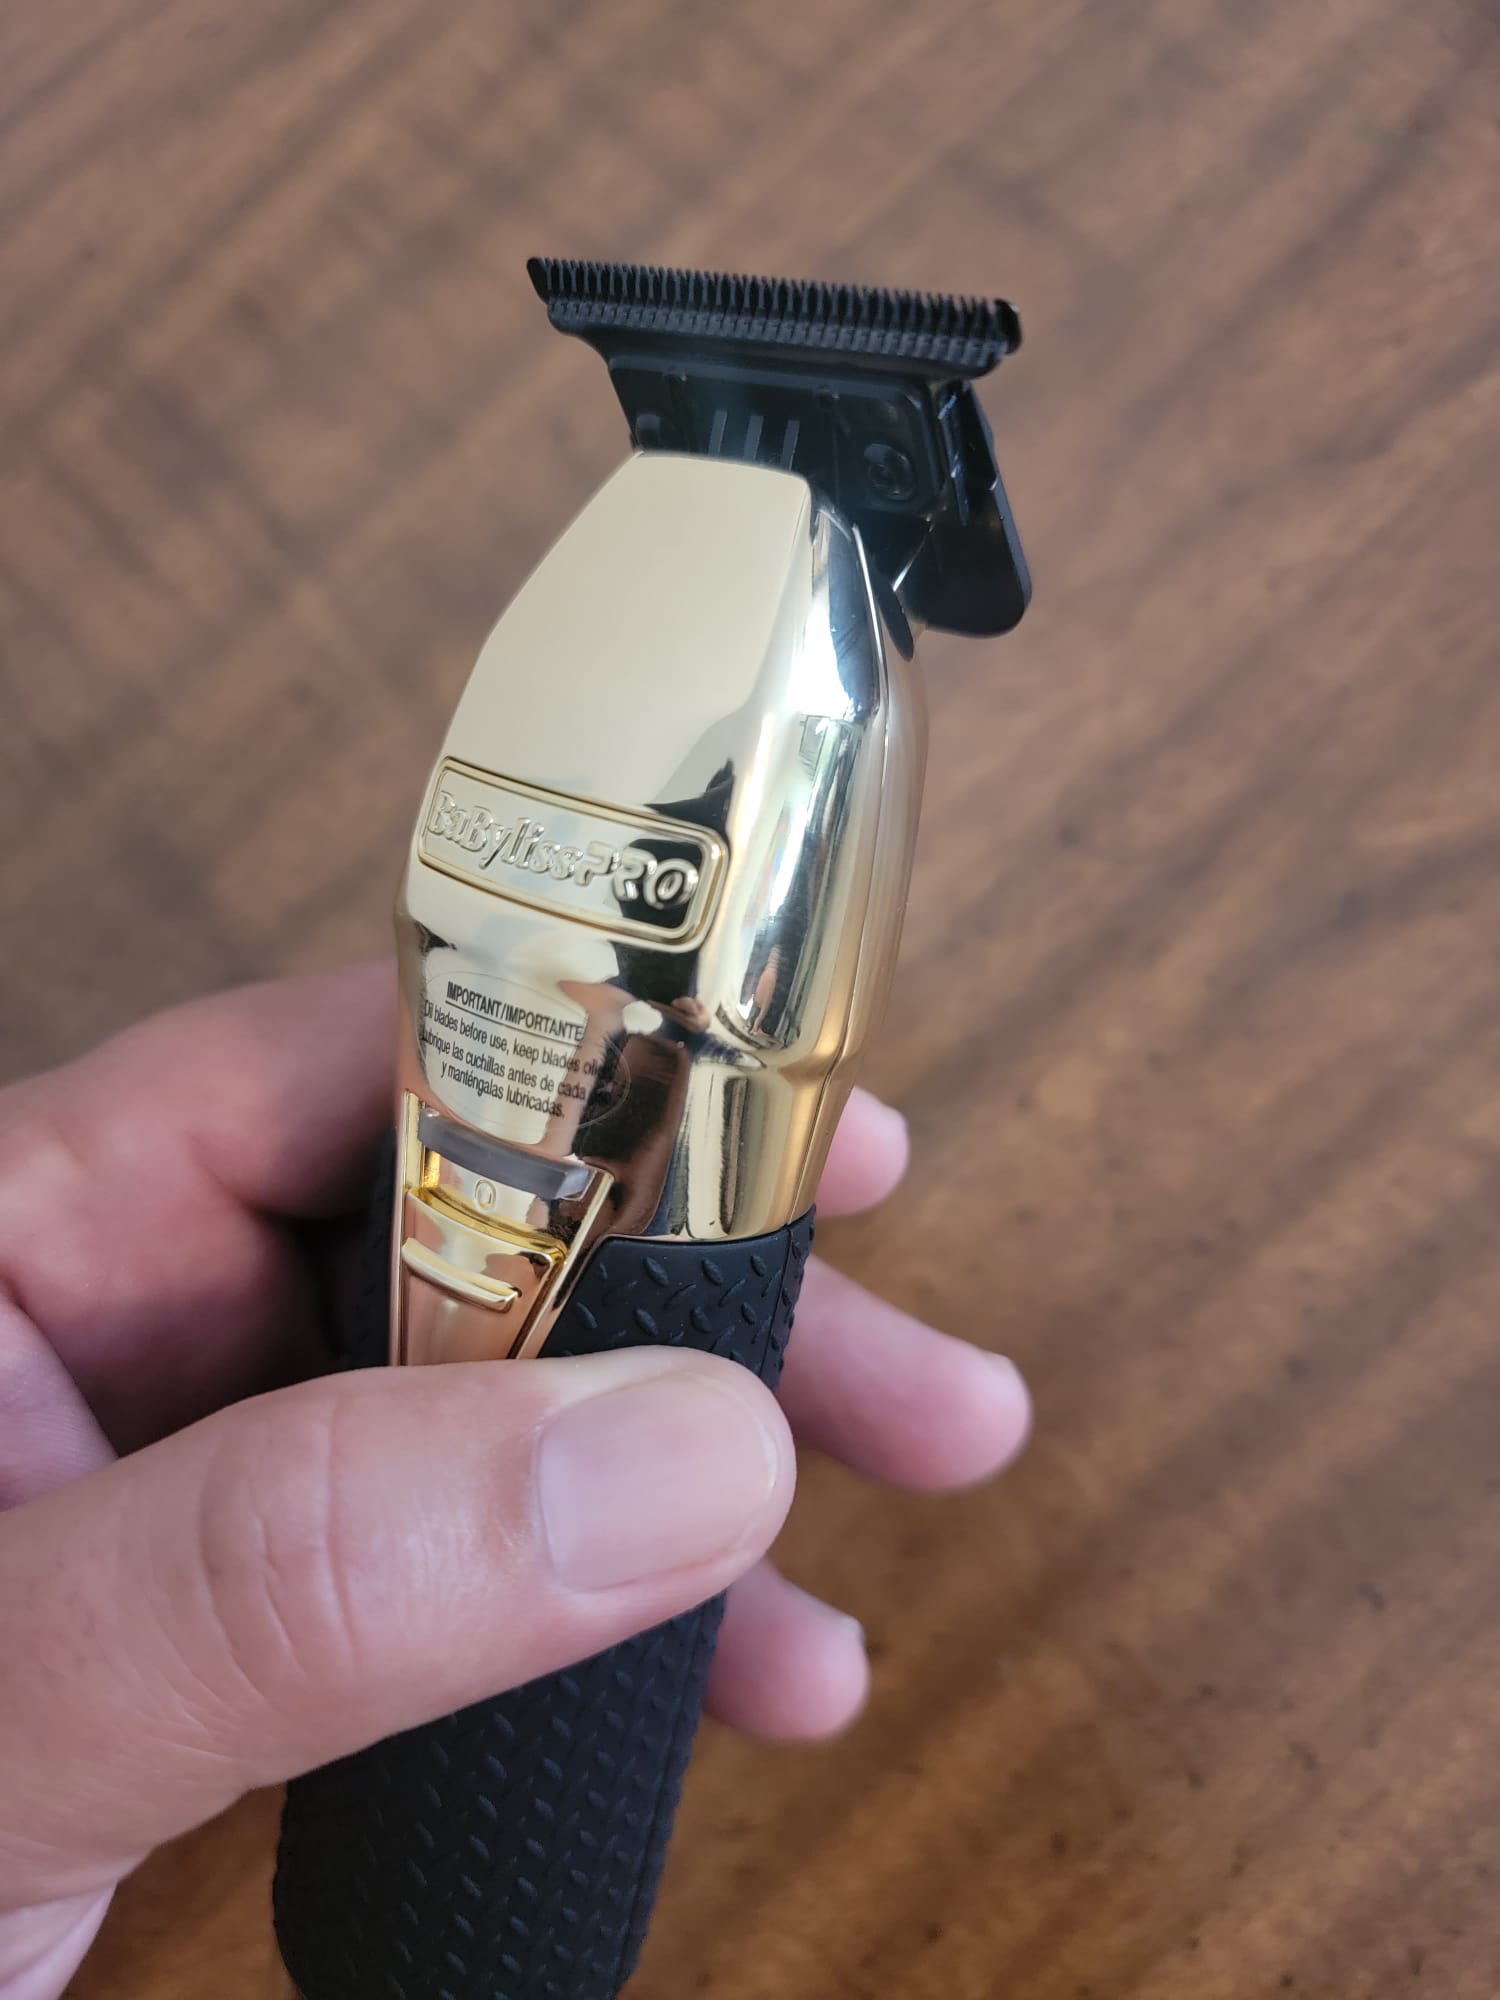 boost+-babyliss-trimmer-rubber-grip-body 